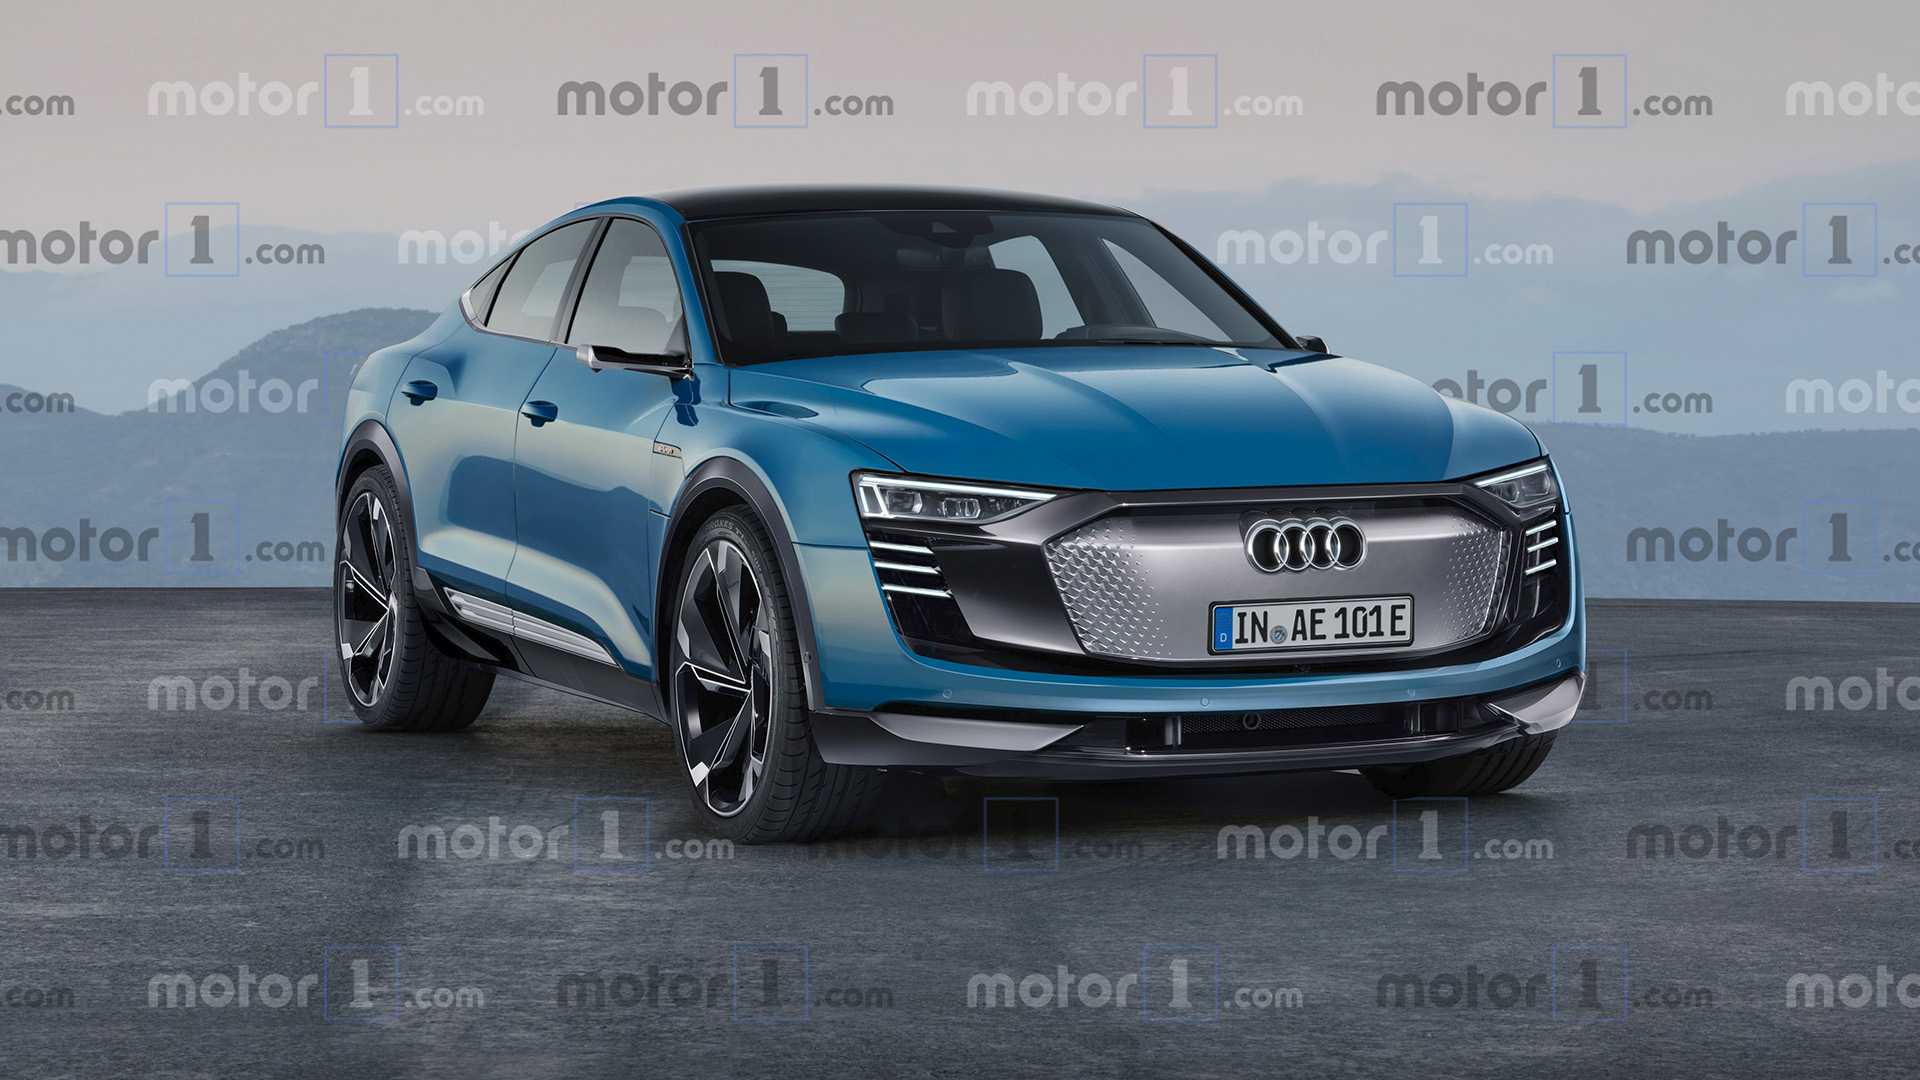 This is the Audi E-Tron Sportback, the electric crossover with 330 km range